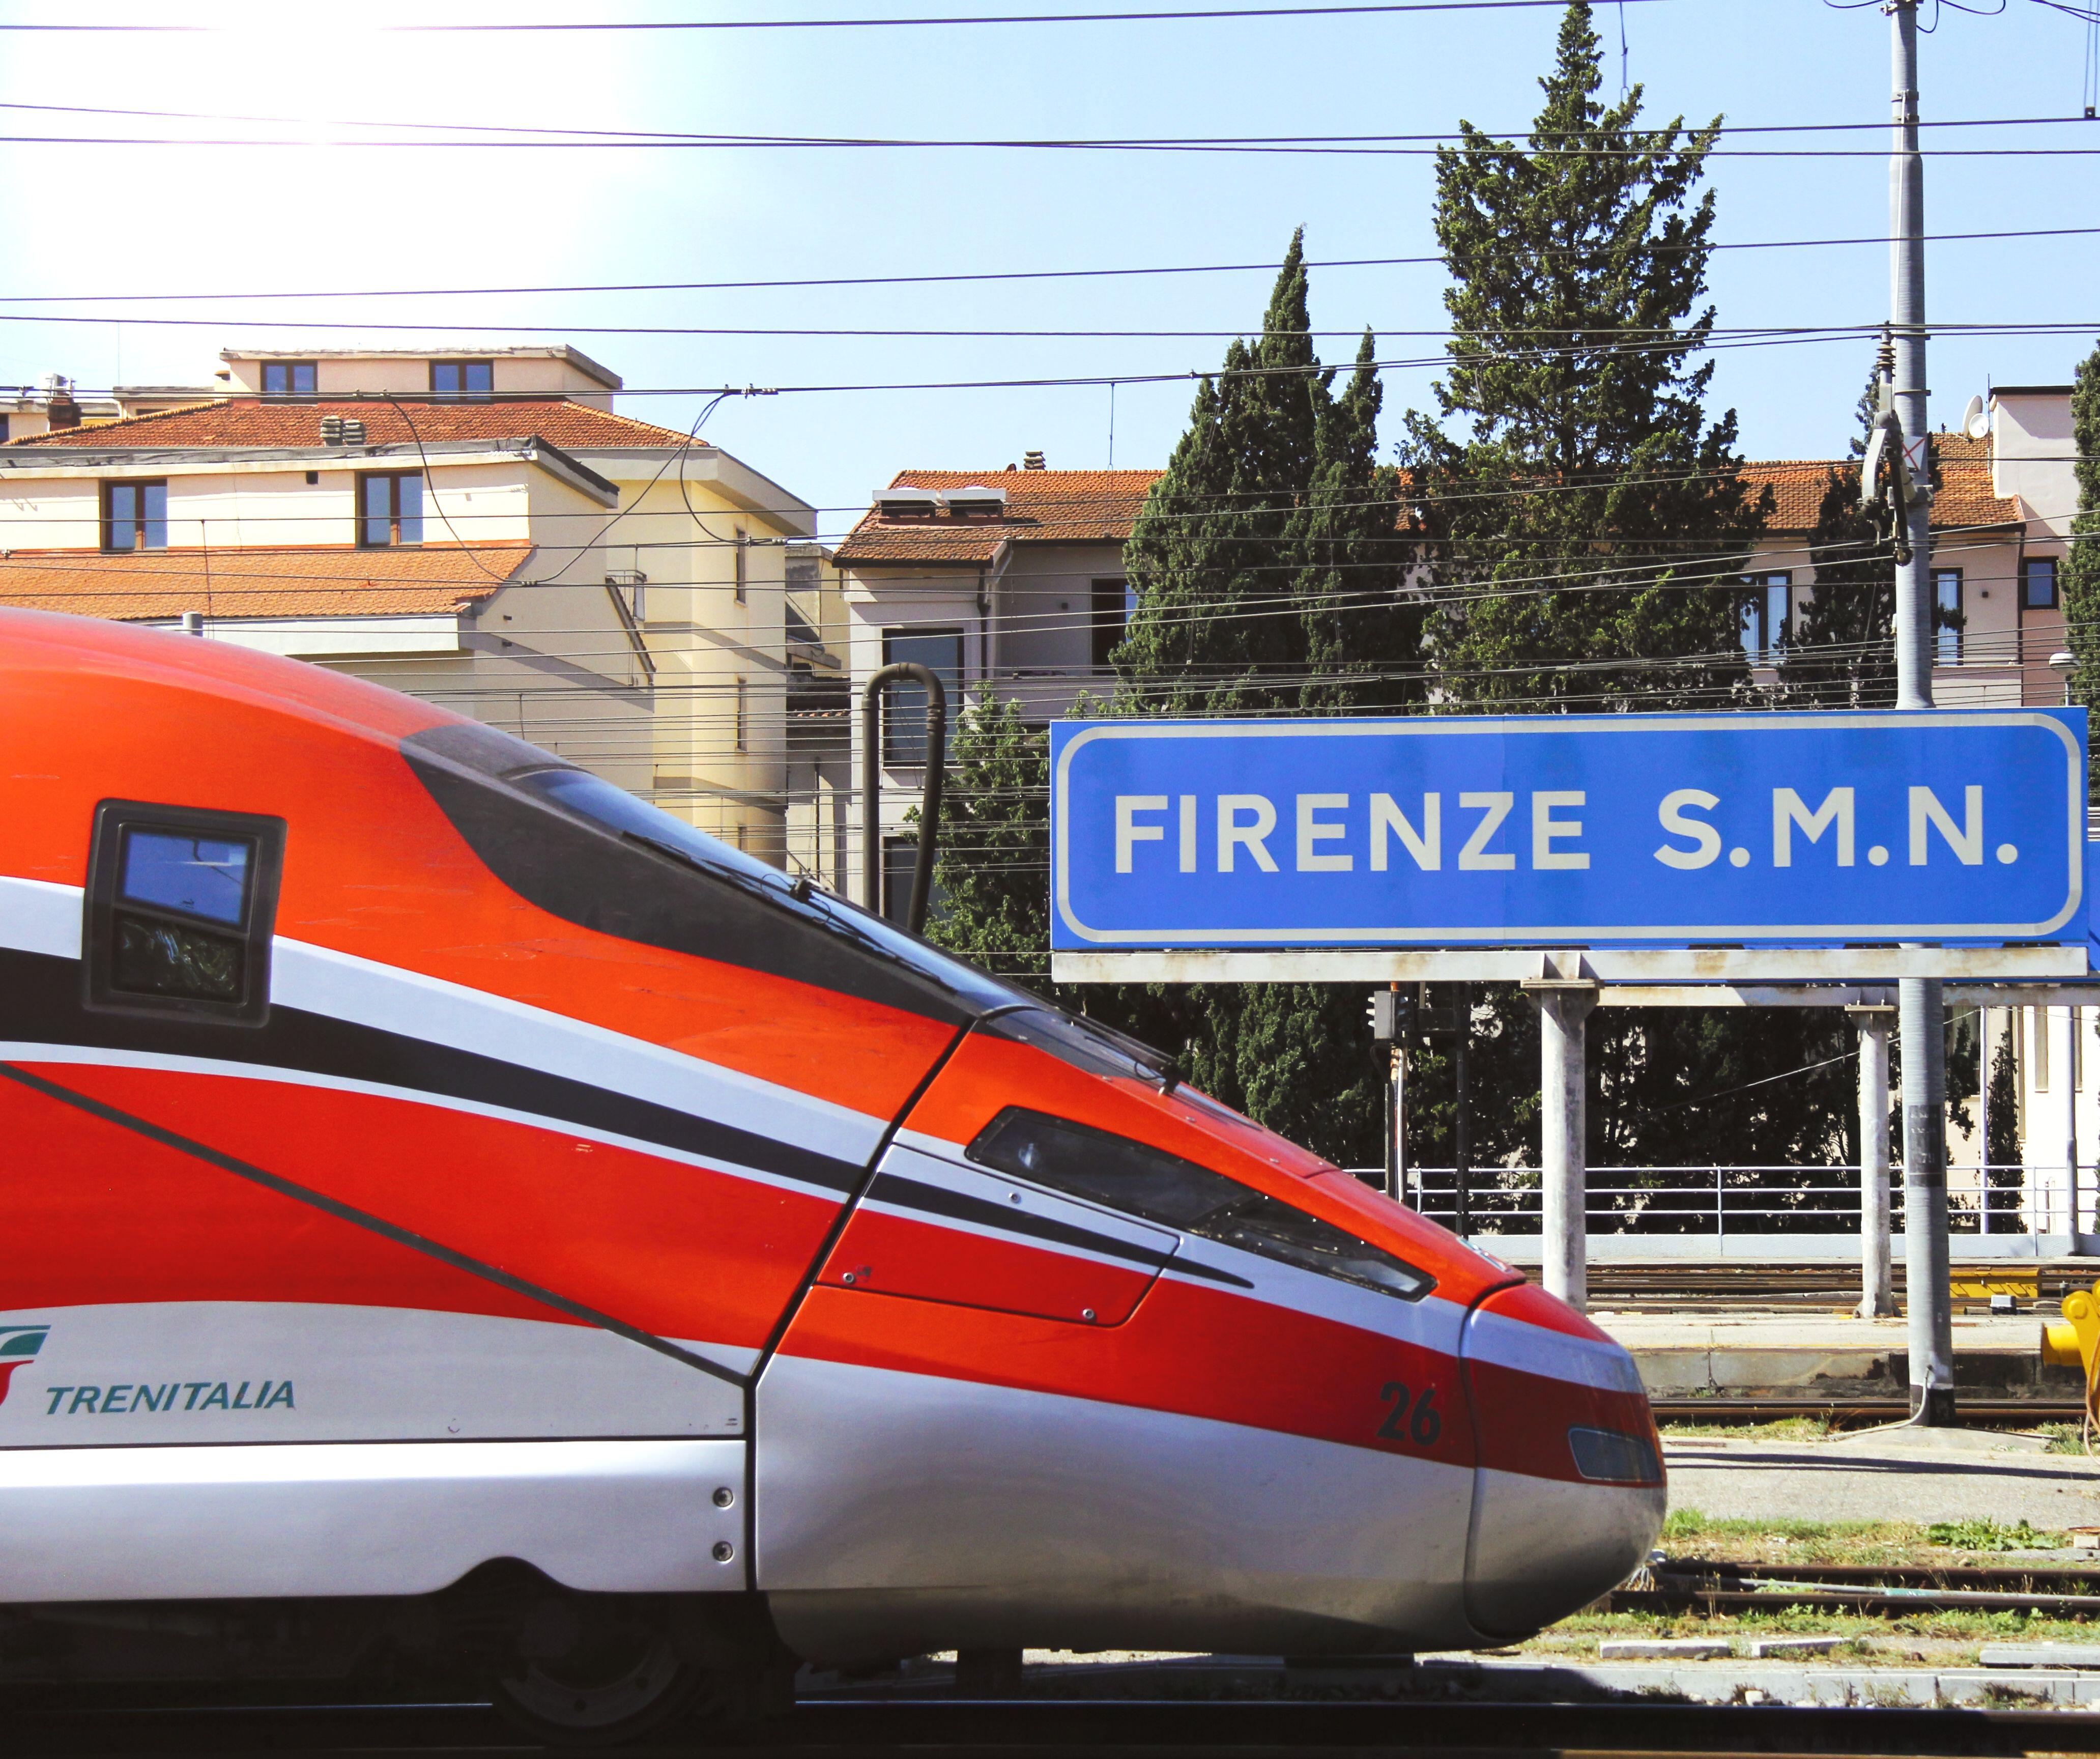 The train from Rome to Florence starts from around £22 and takes 90 minutes